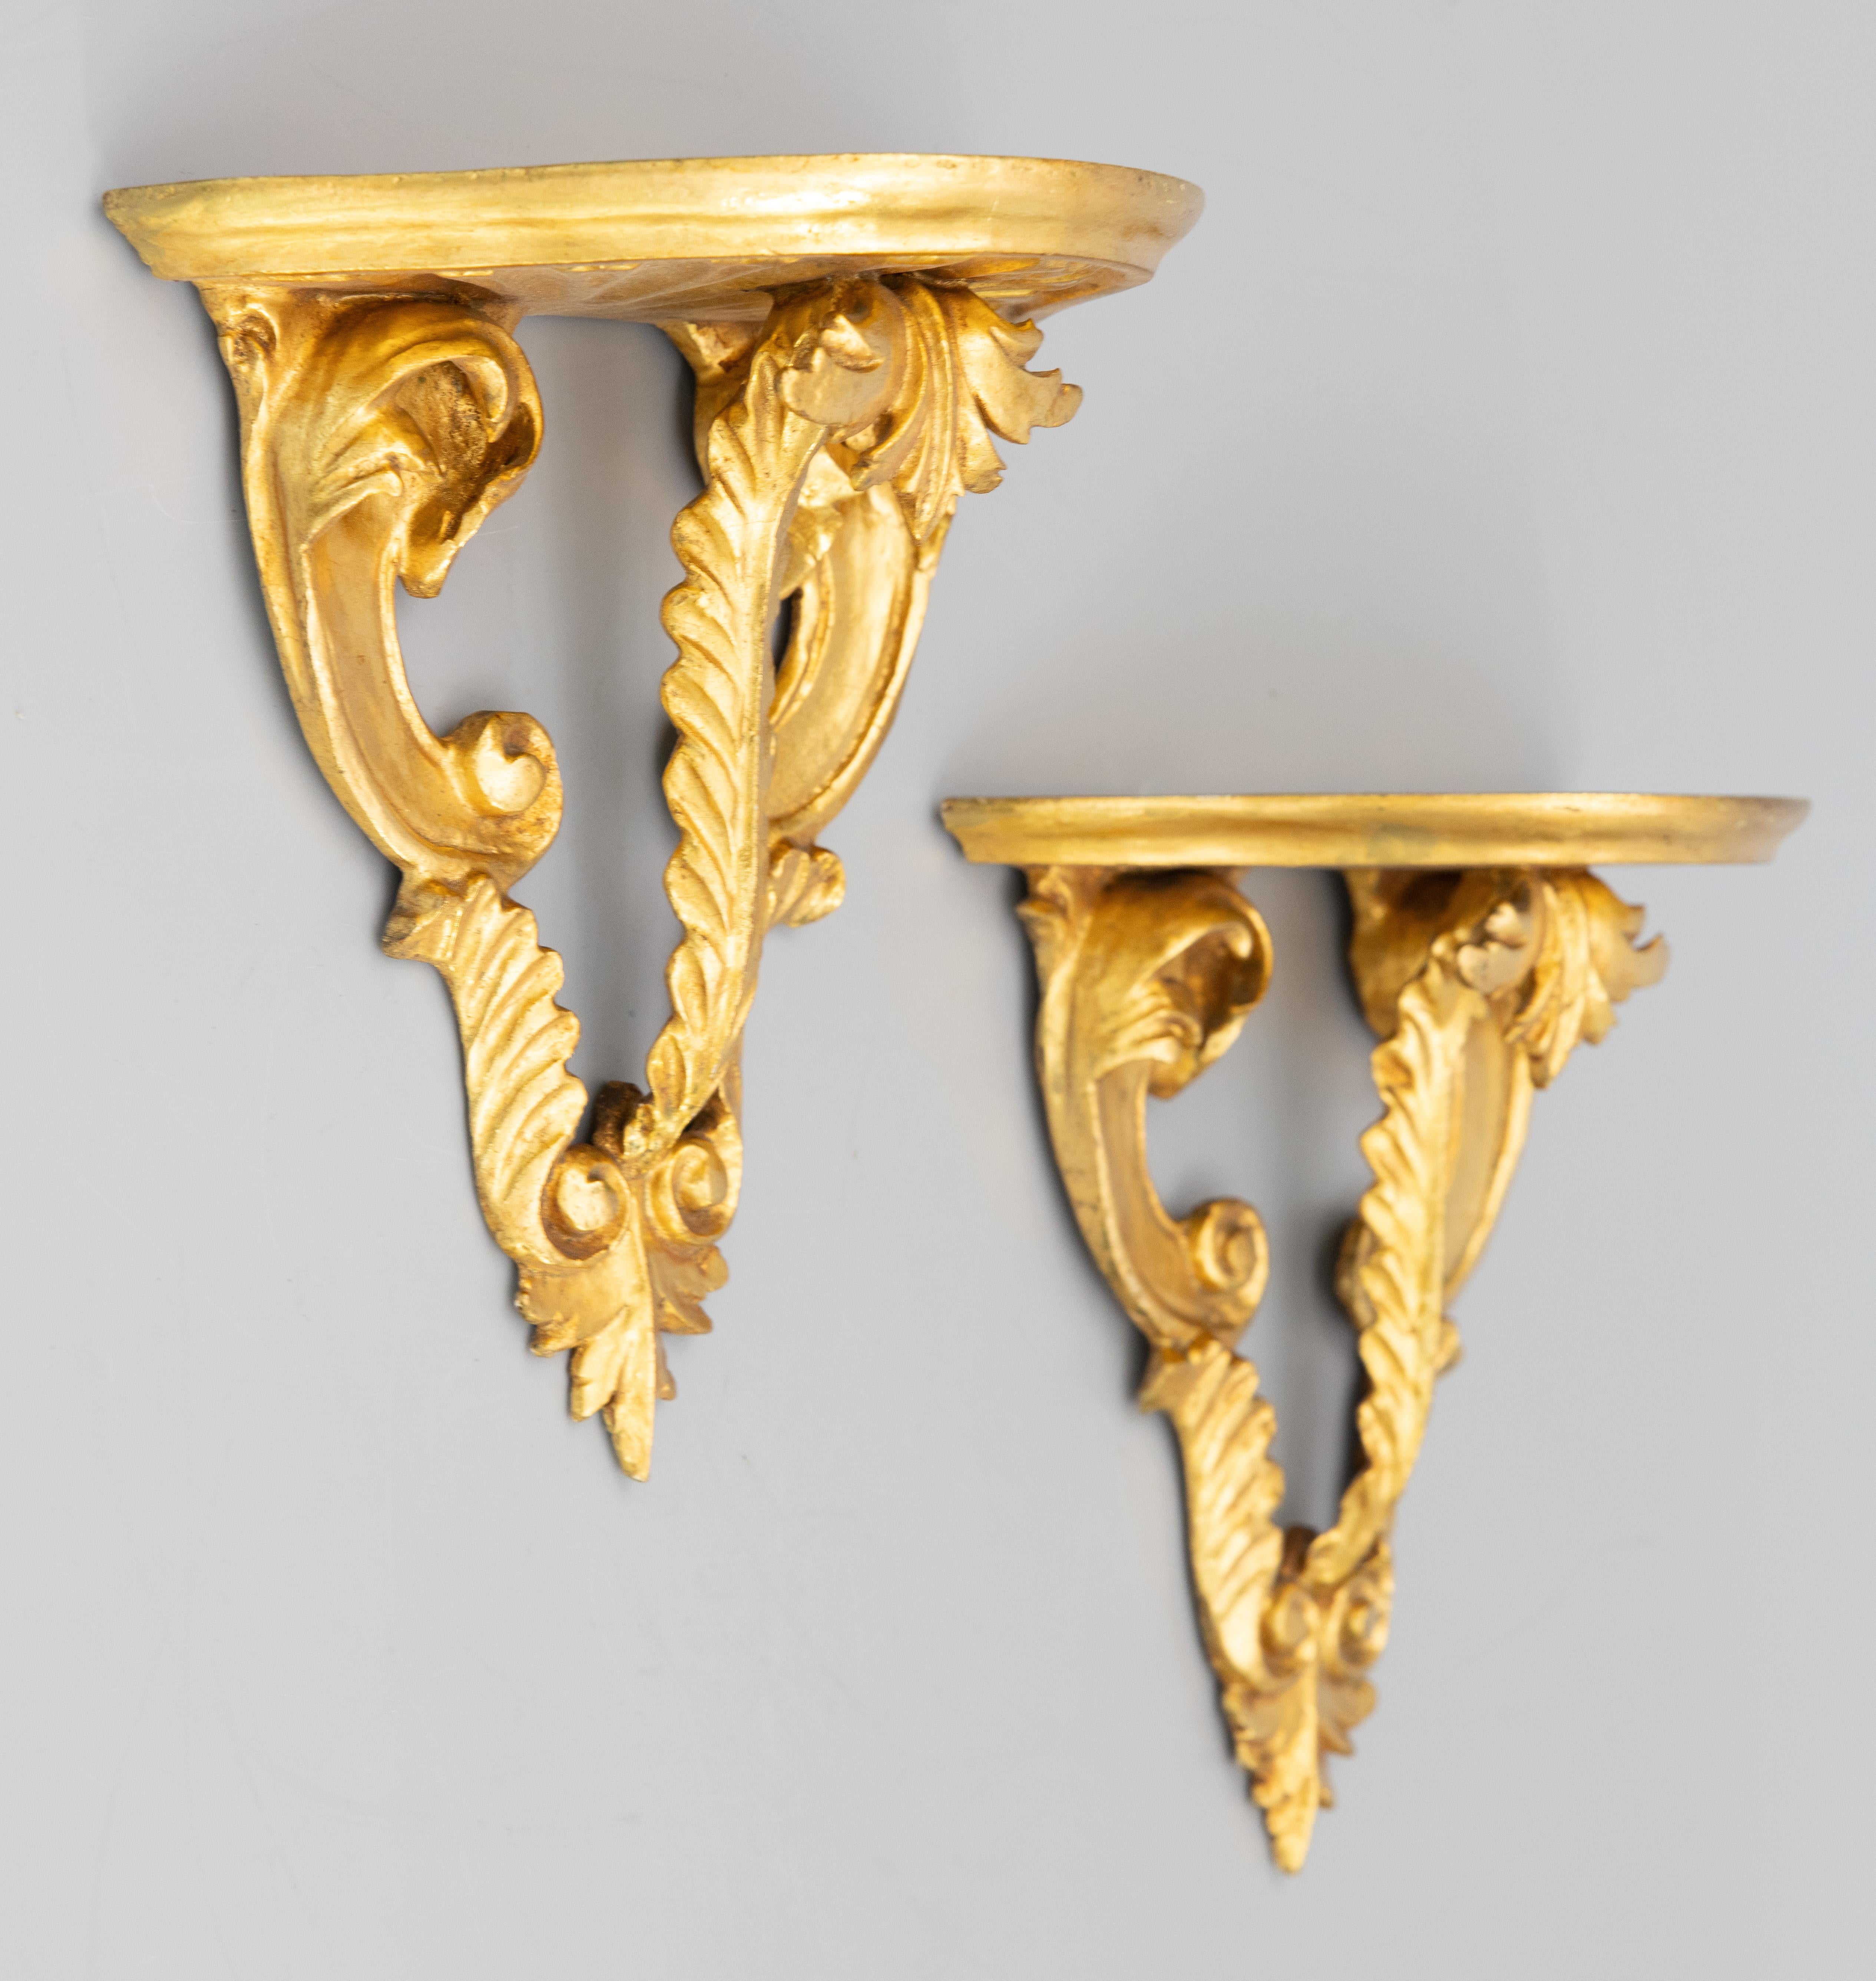 Pair of Italian Florentine Carved Giltwood Wall Brackets Shelves, circa 1950 For Sale 1